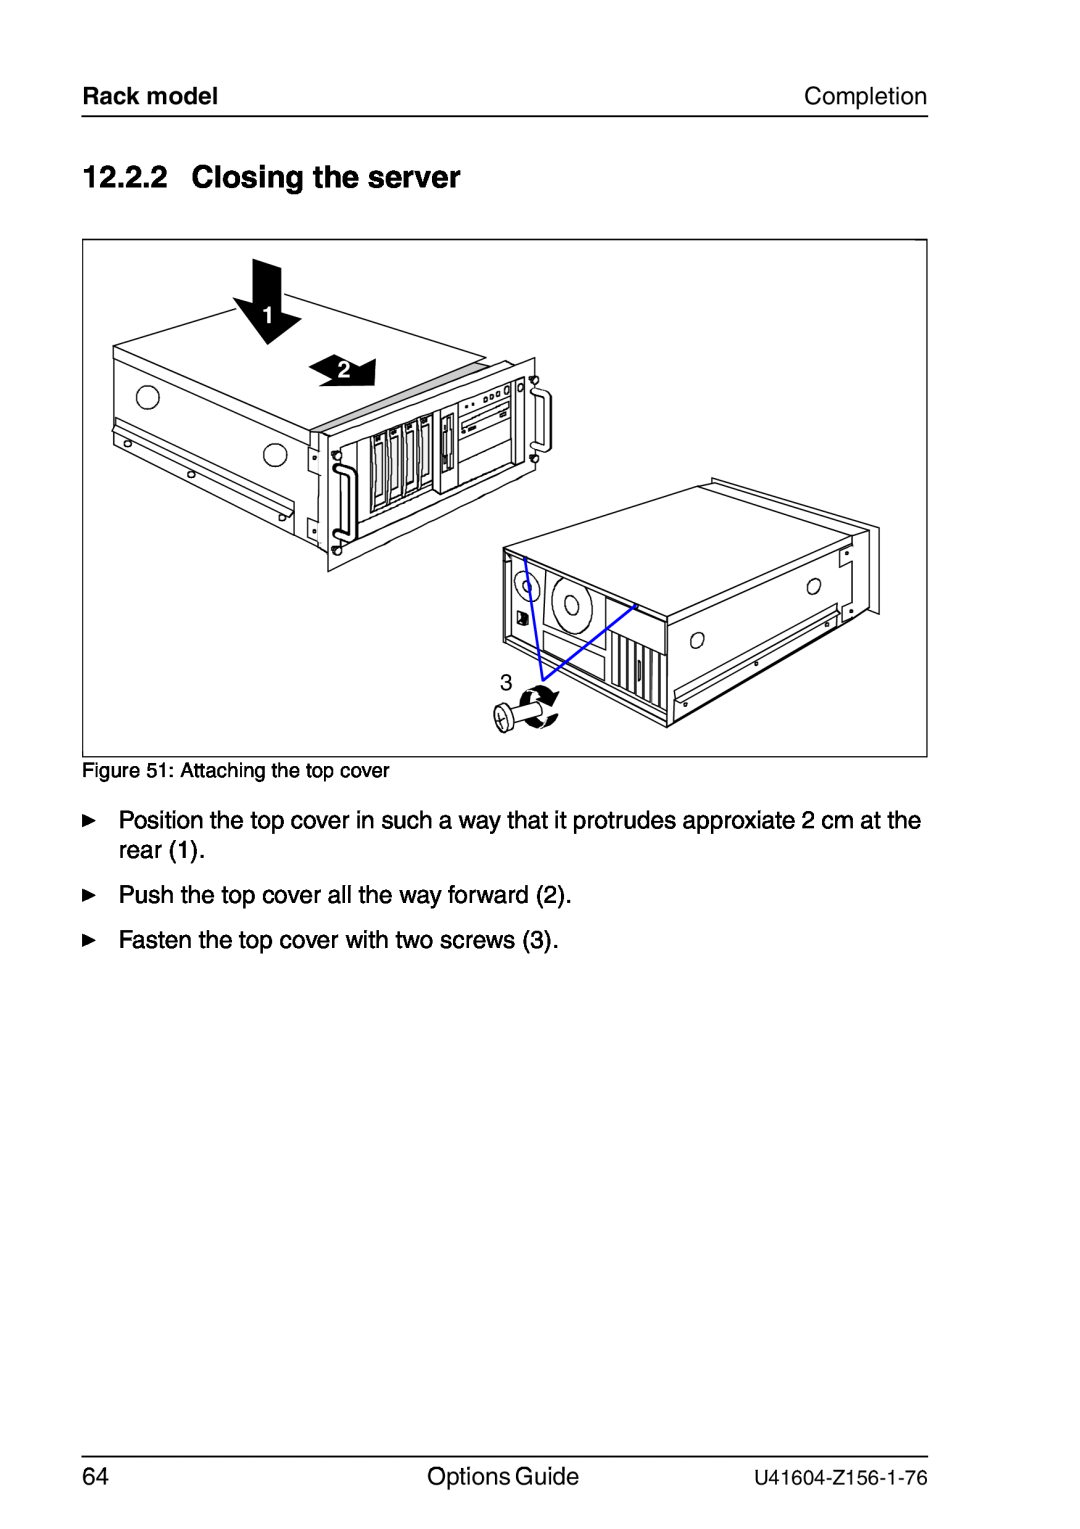 Fujitsu TX150 S3 manual Closing the server, Rack model, Completion, Attaching the top cover 